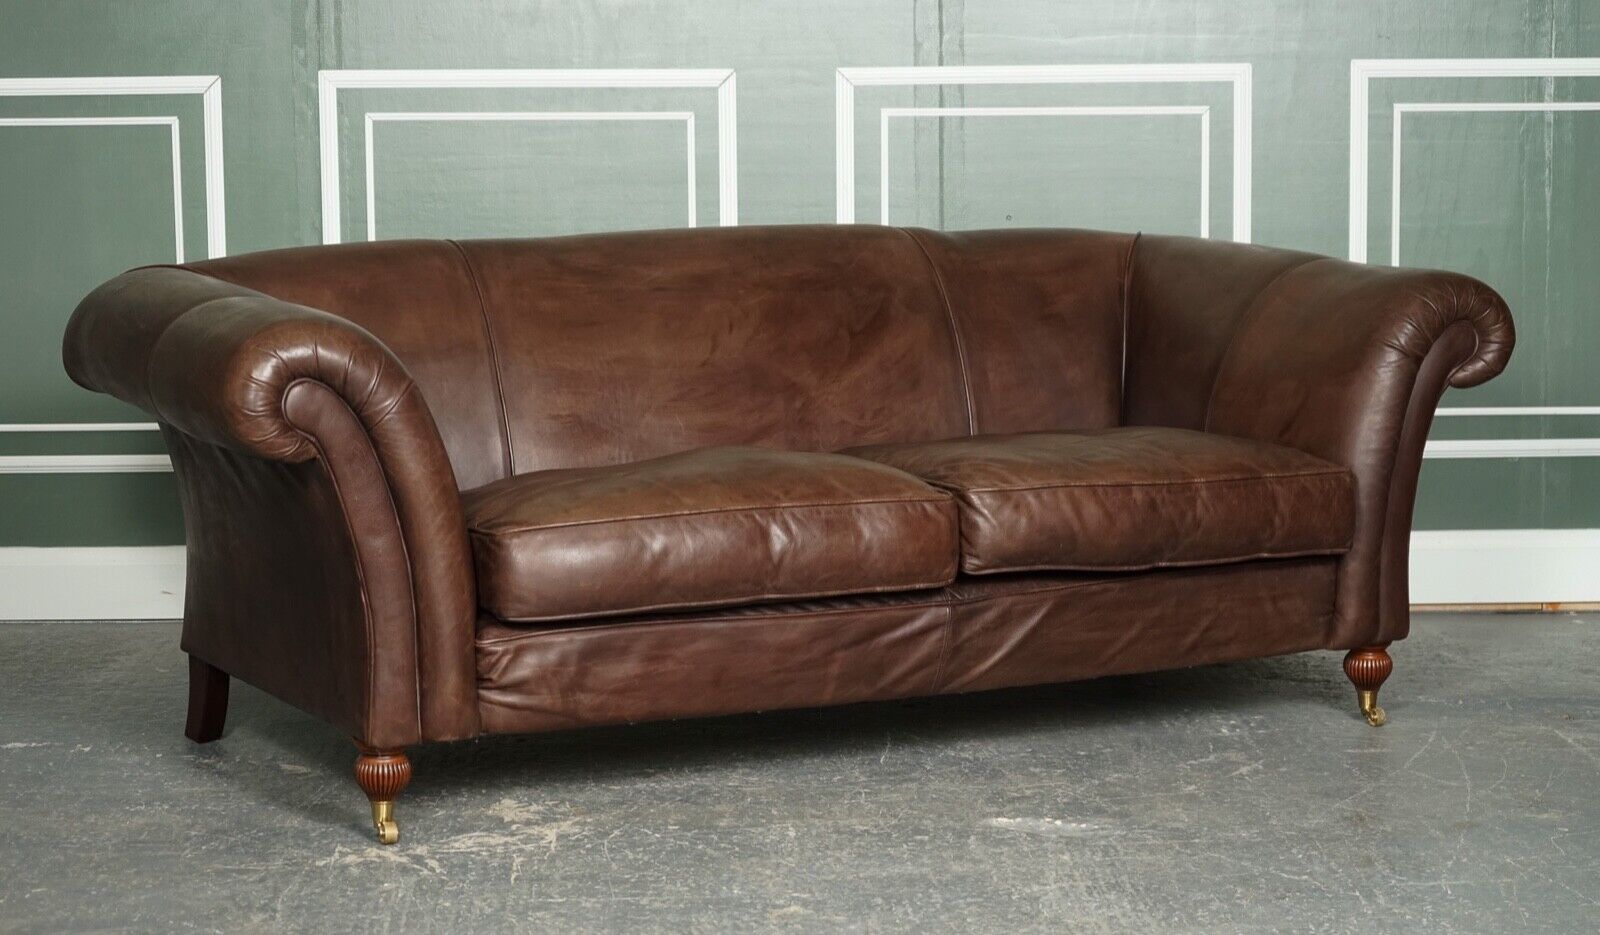 STUNNING MADE TO ORDER LARGE HERITAGE BROWN LEATHER 2 TO 3 SEATER SOFA